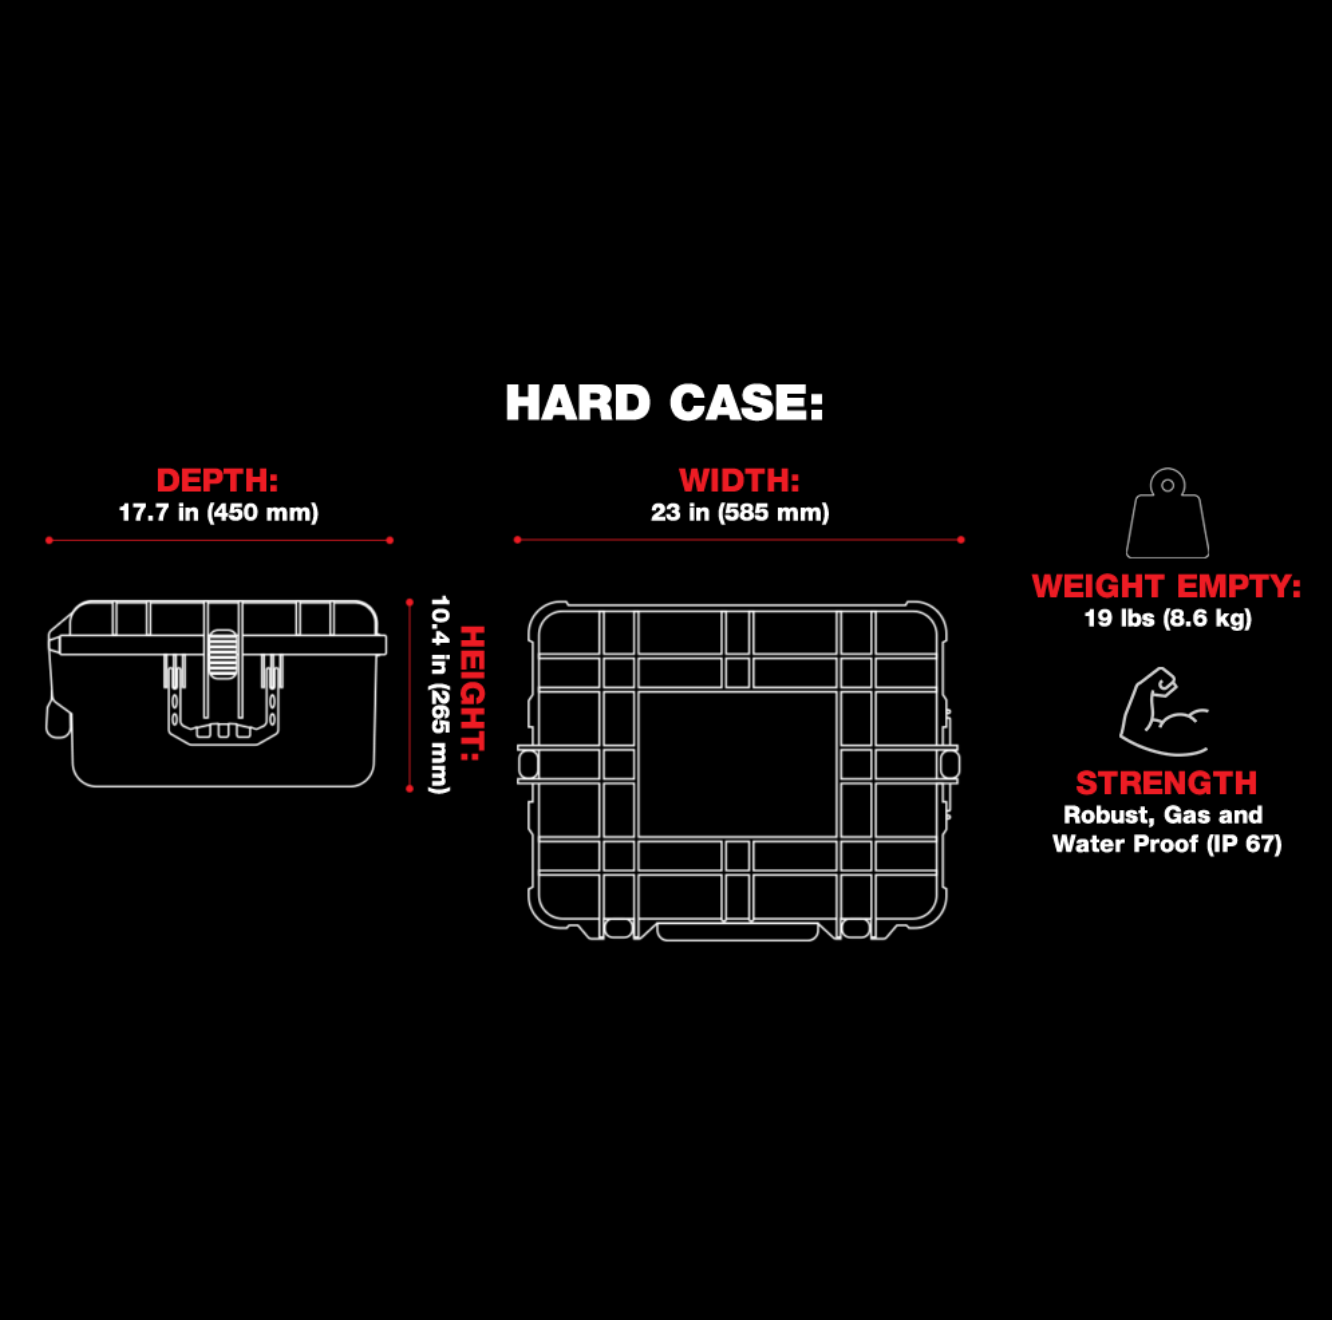 RONIN Hard Case, fully waterproof and designed to Protect your Equipment